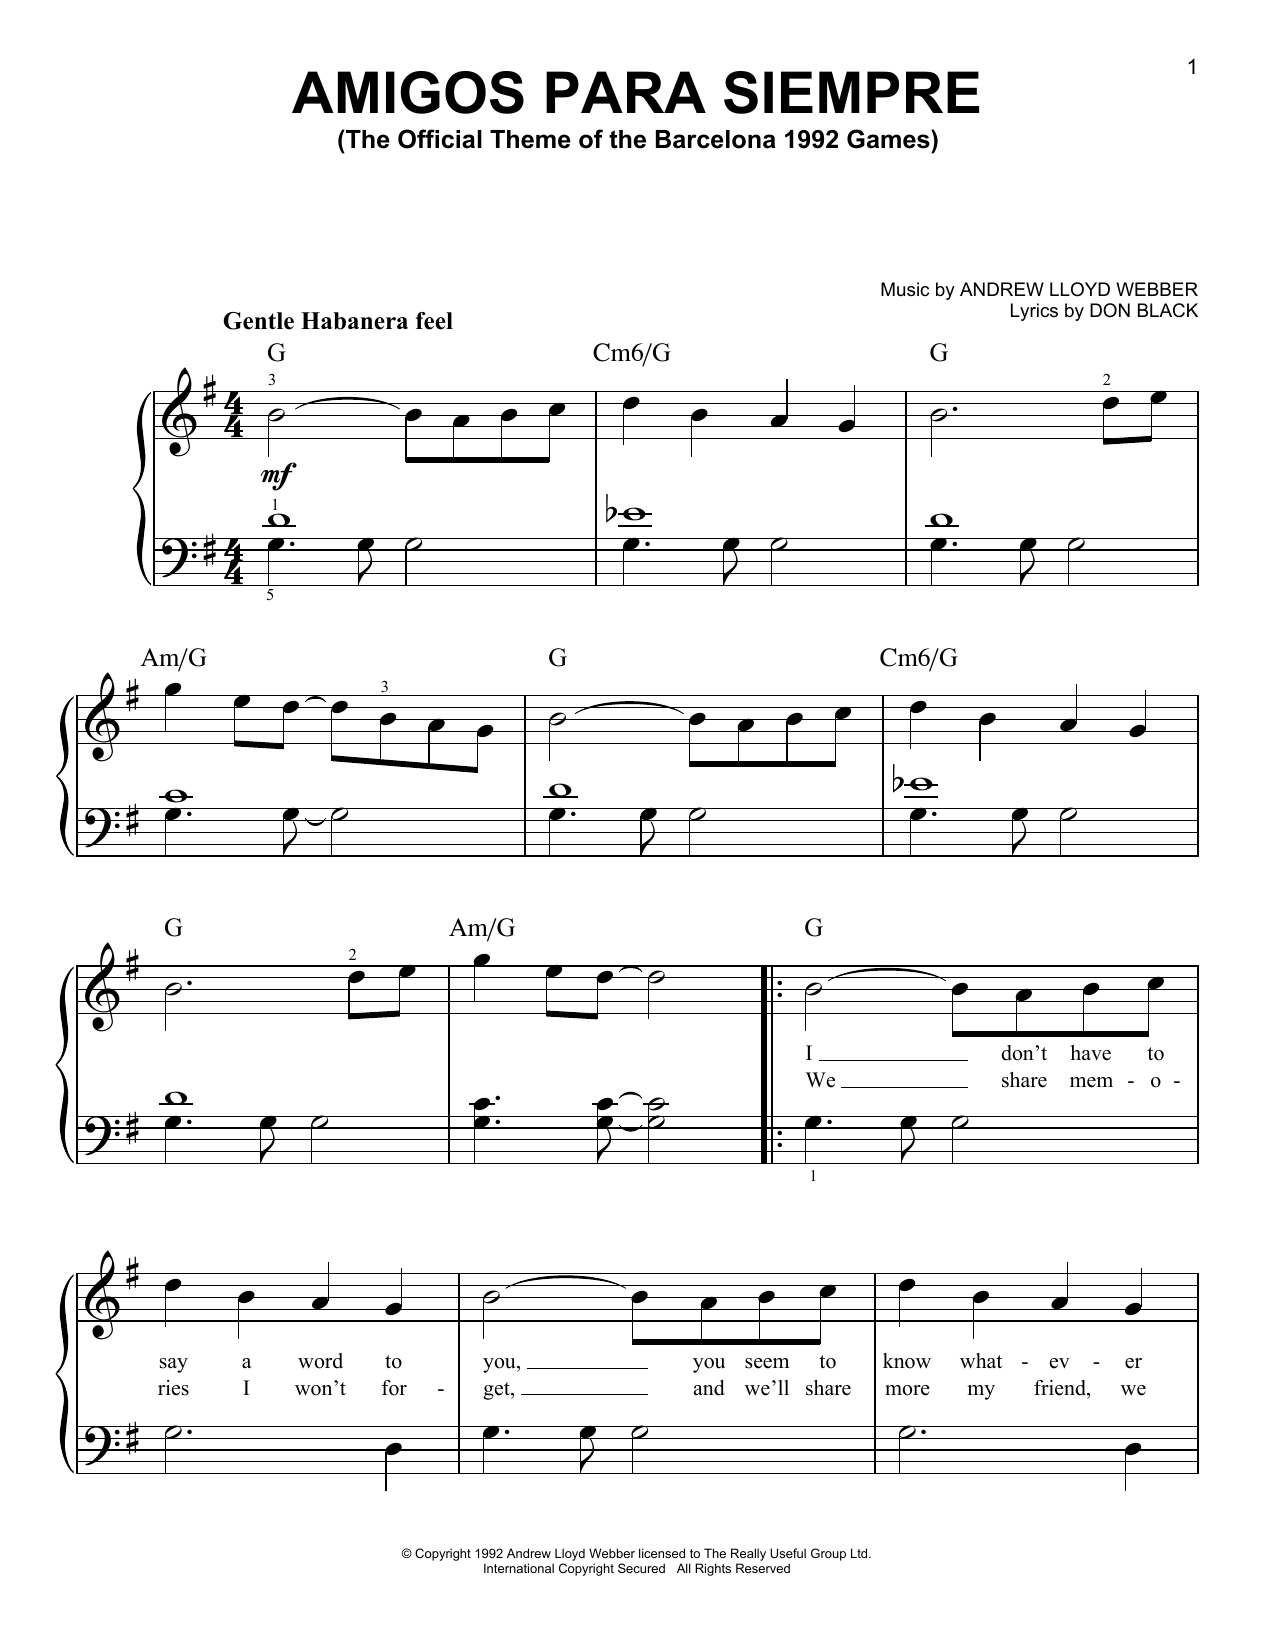 Download Andrew Lloyd Webber Amigos Para Siempre (Friends For Life) Sheet Music